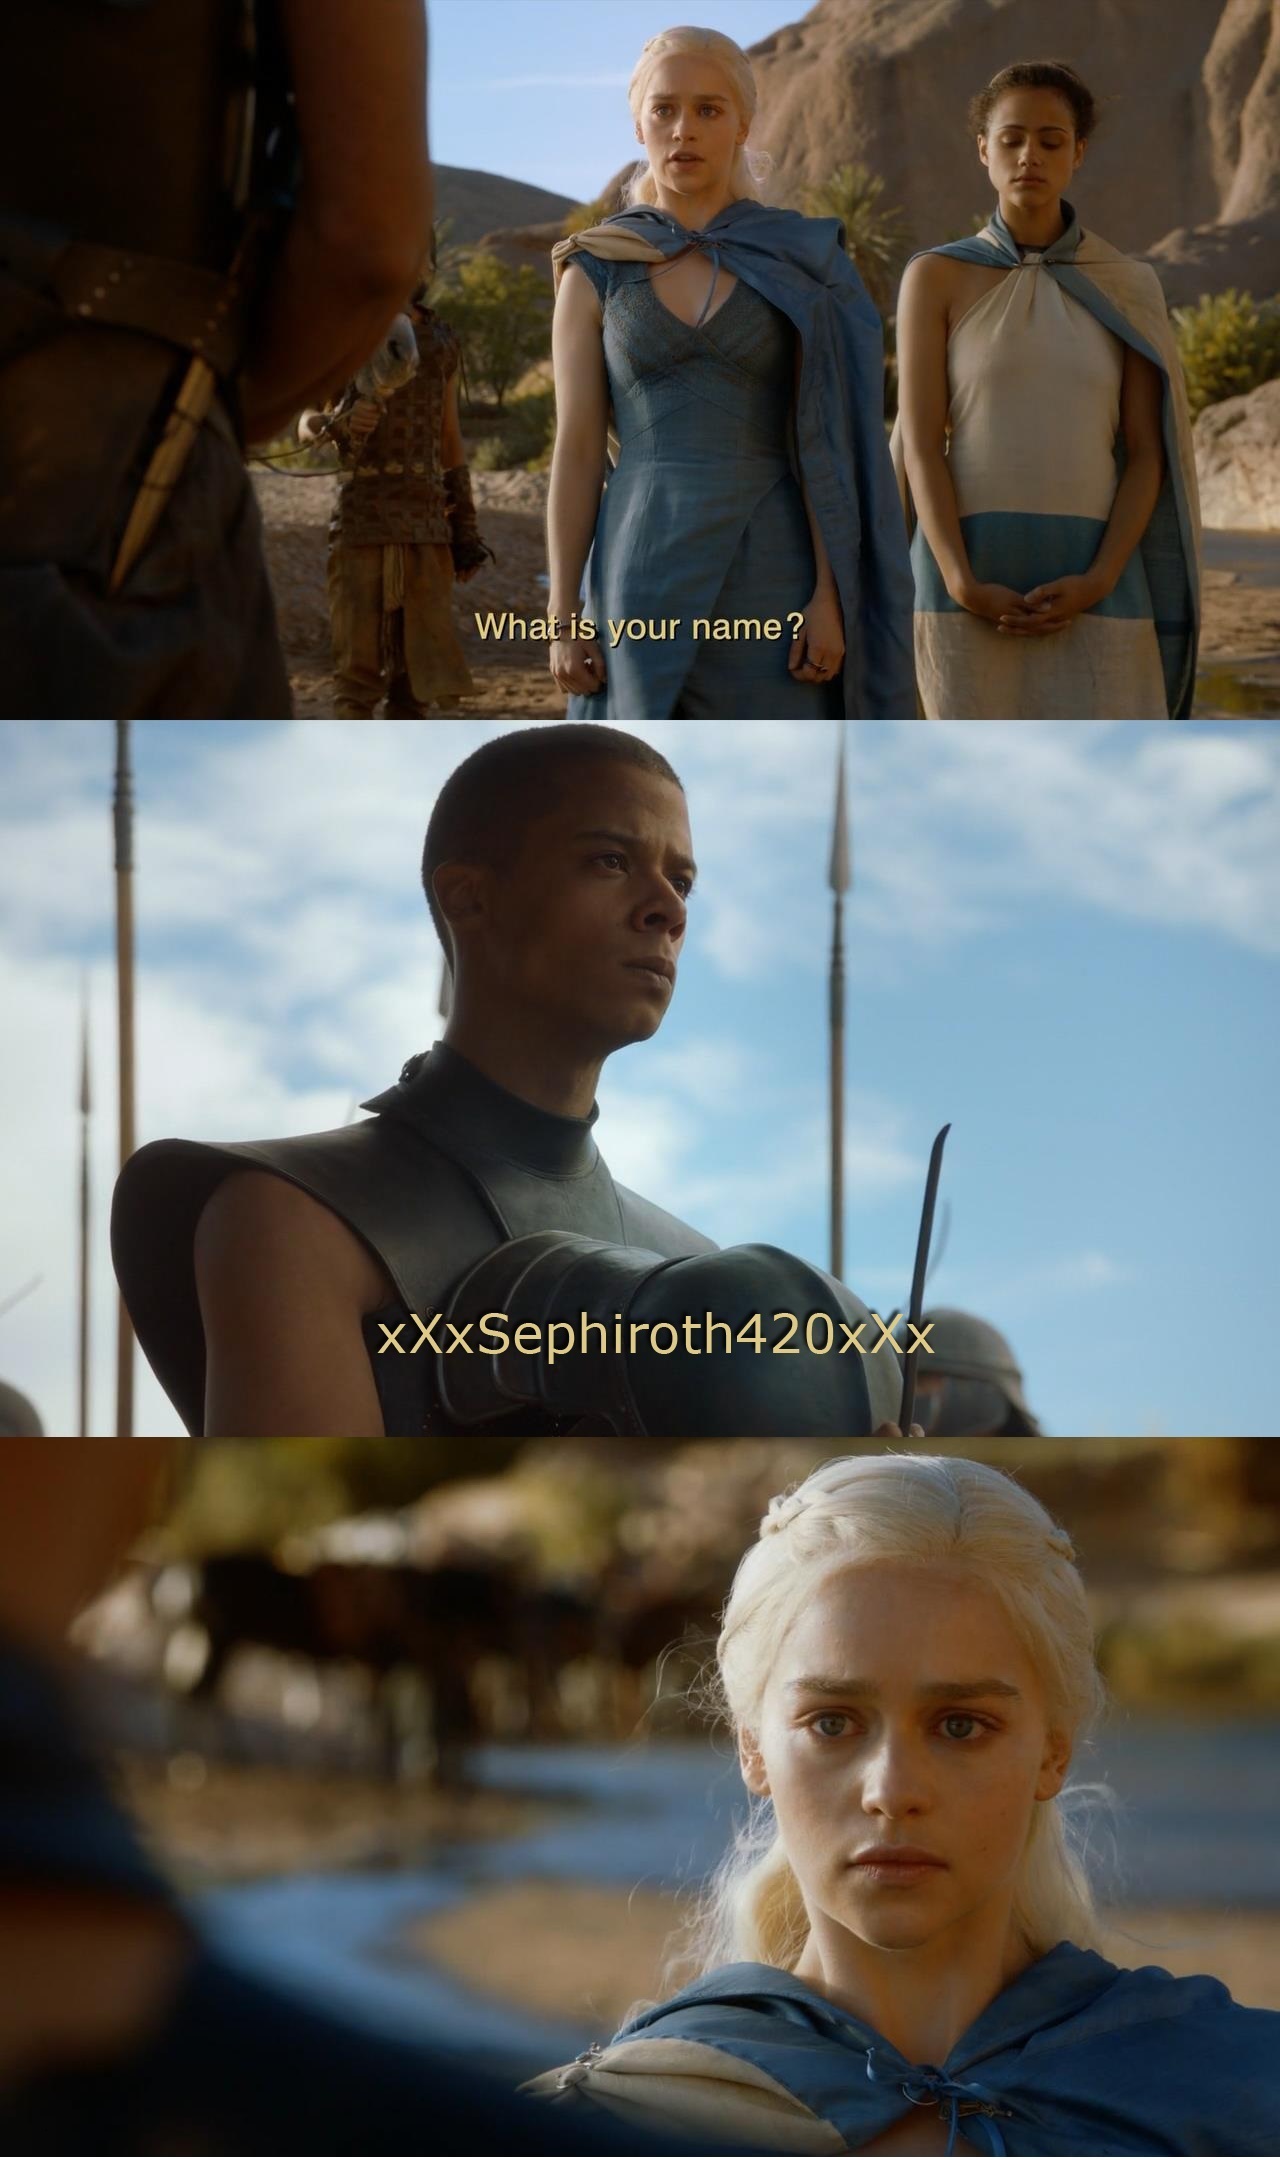 Dany runs into some issues with the Unsullied choosing their own names.